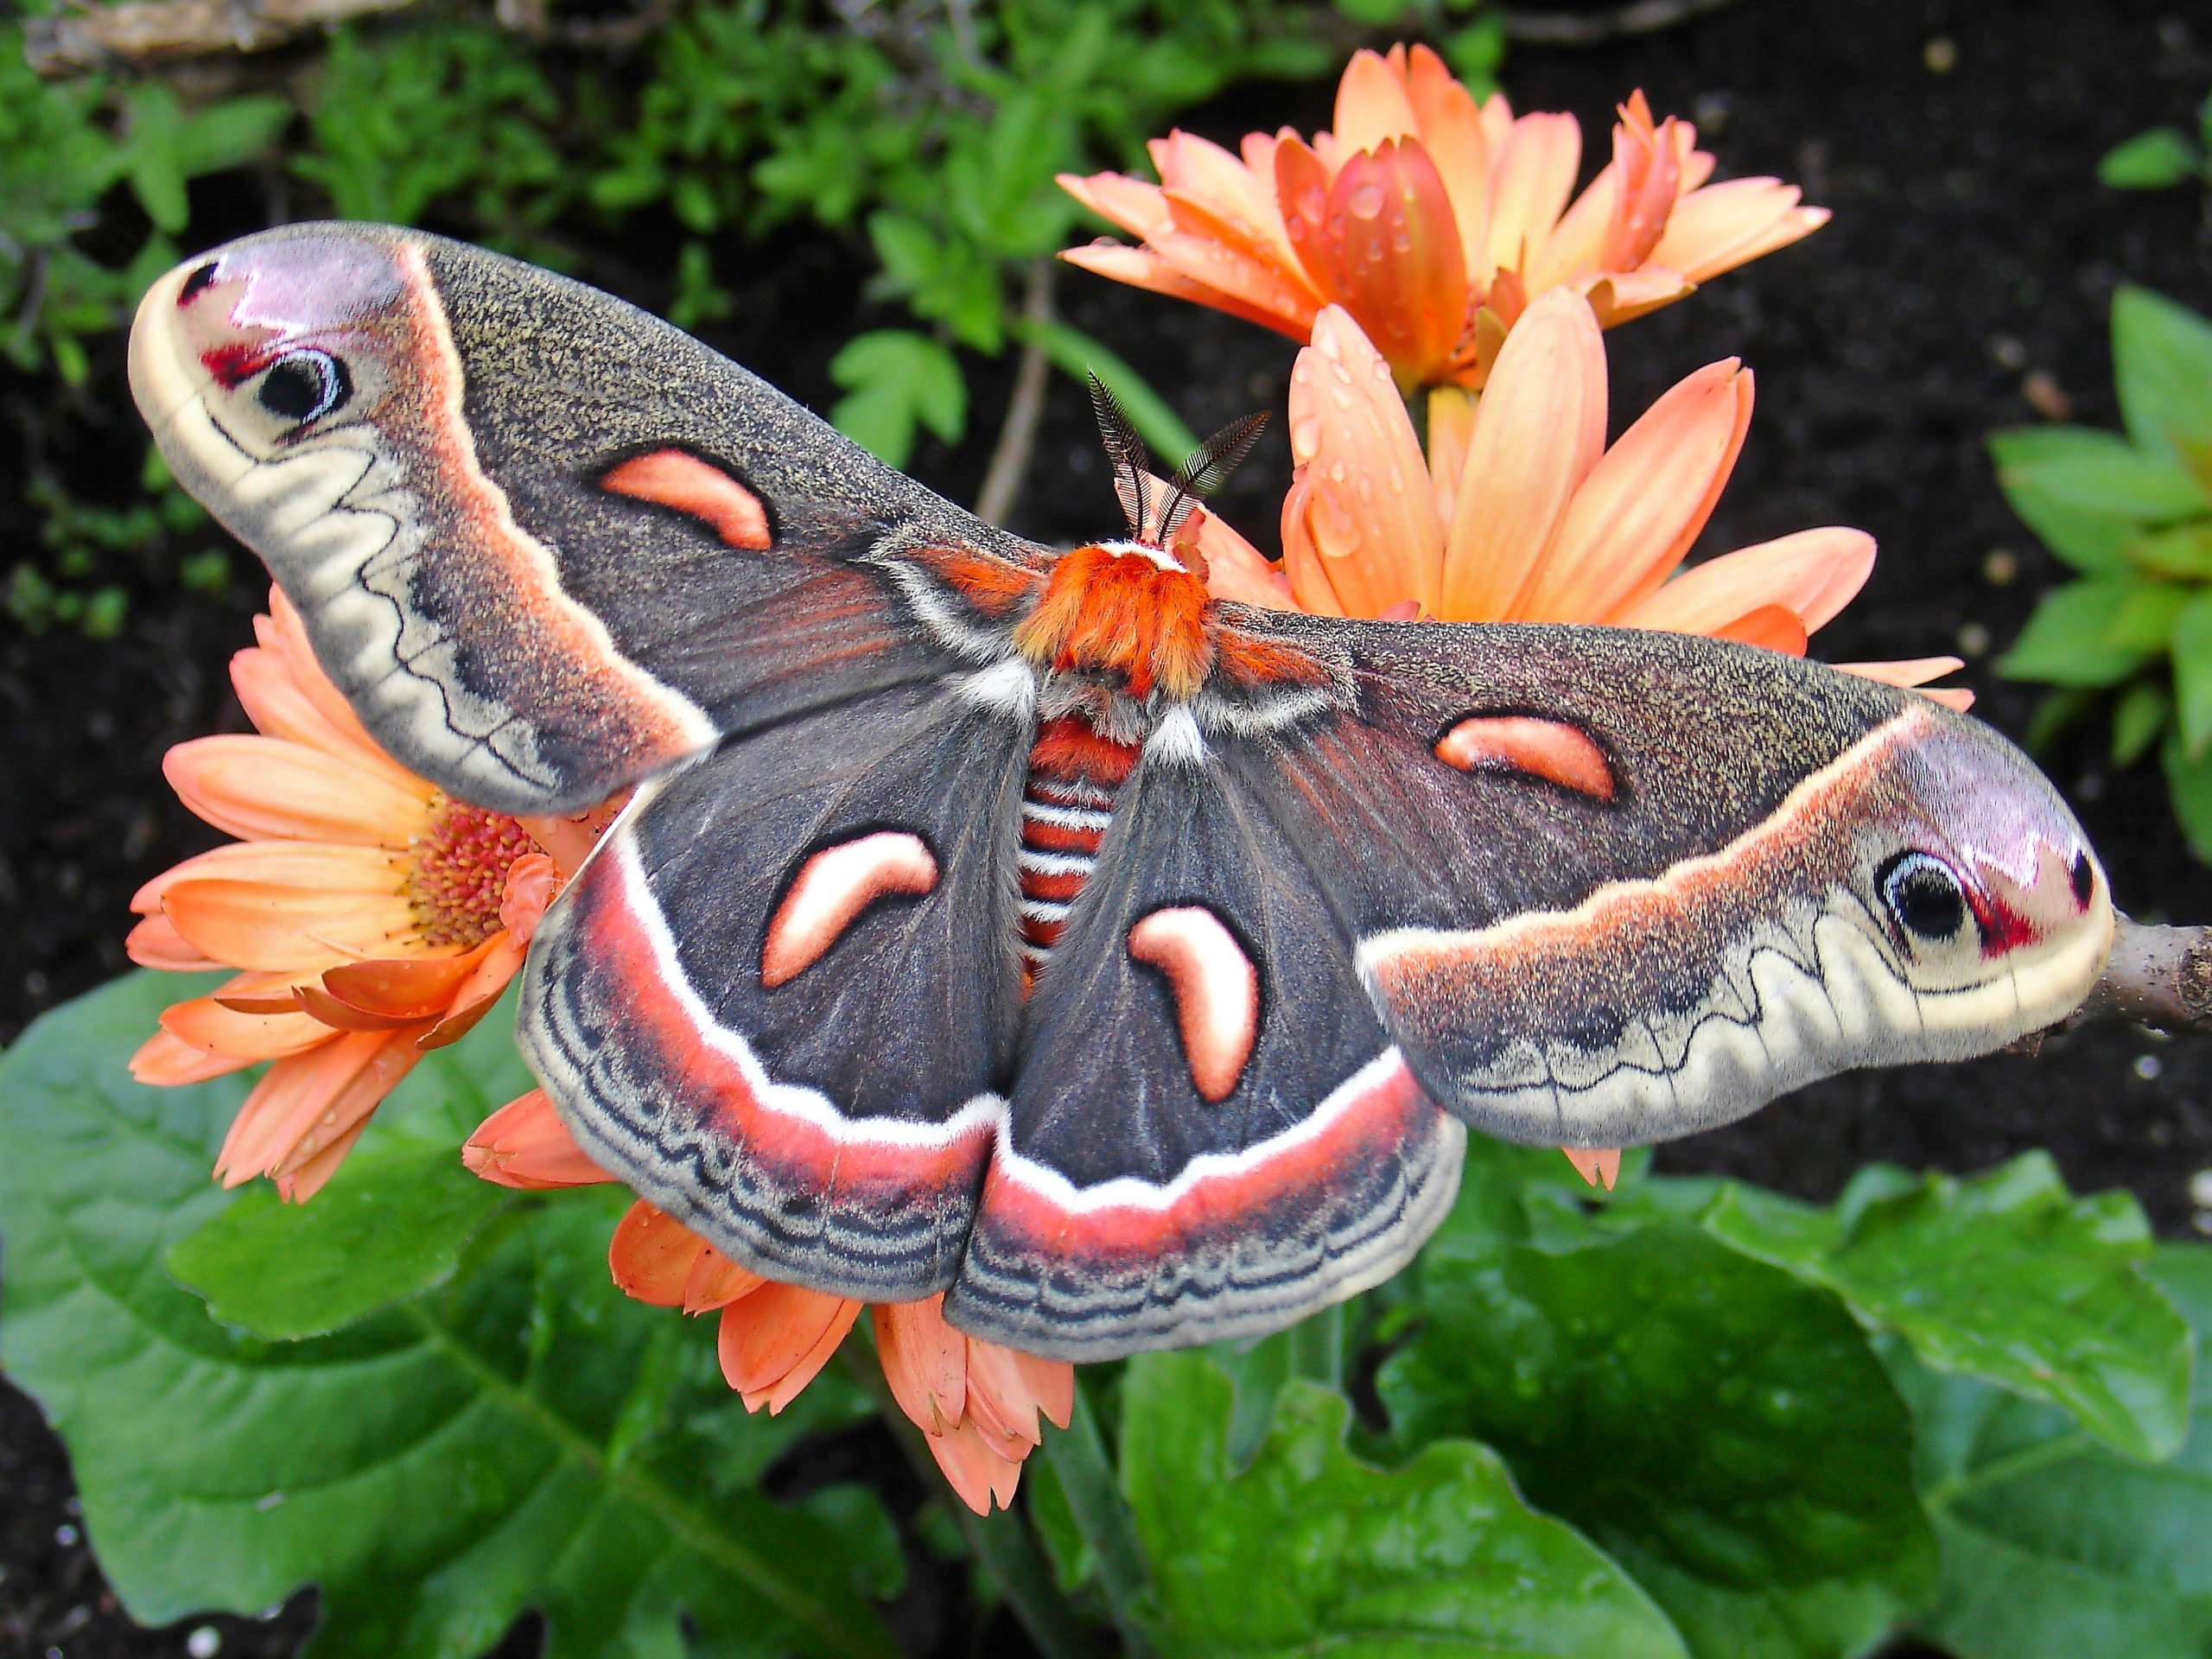 18 Pictures That Will Change the Way You Look at Moths